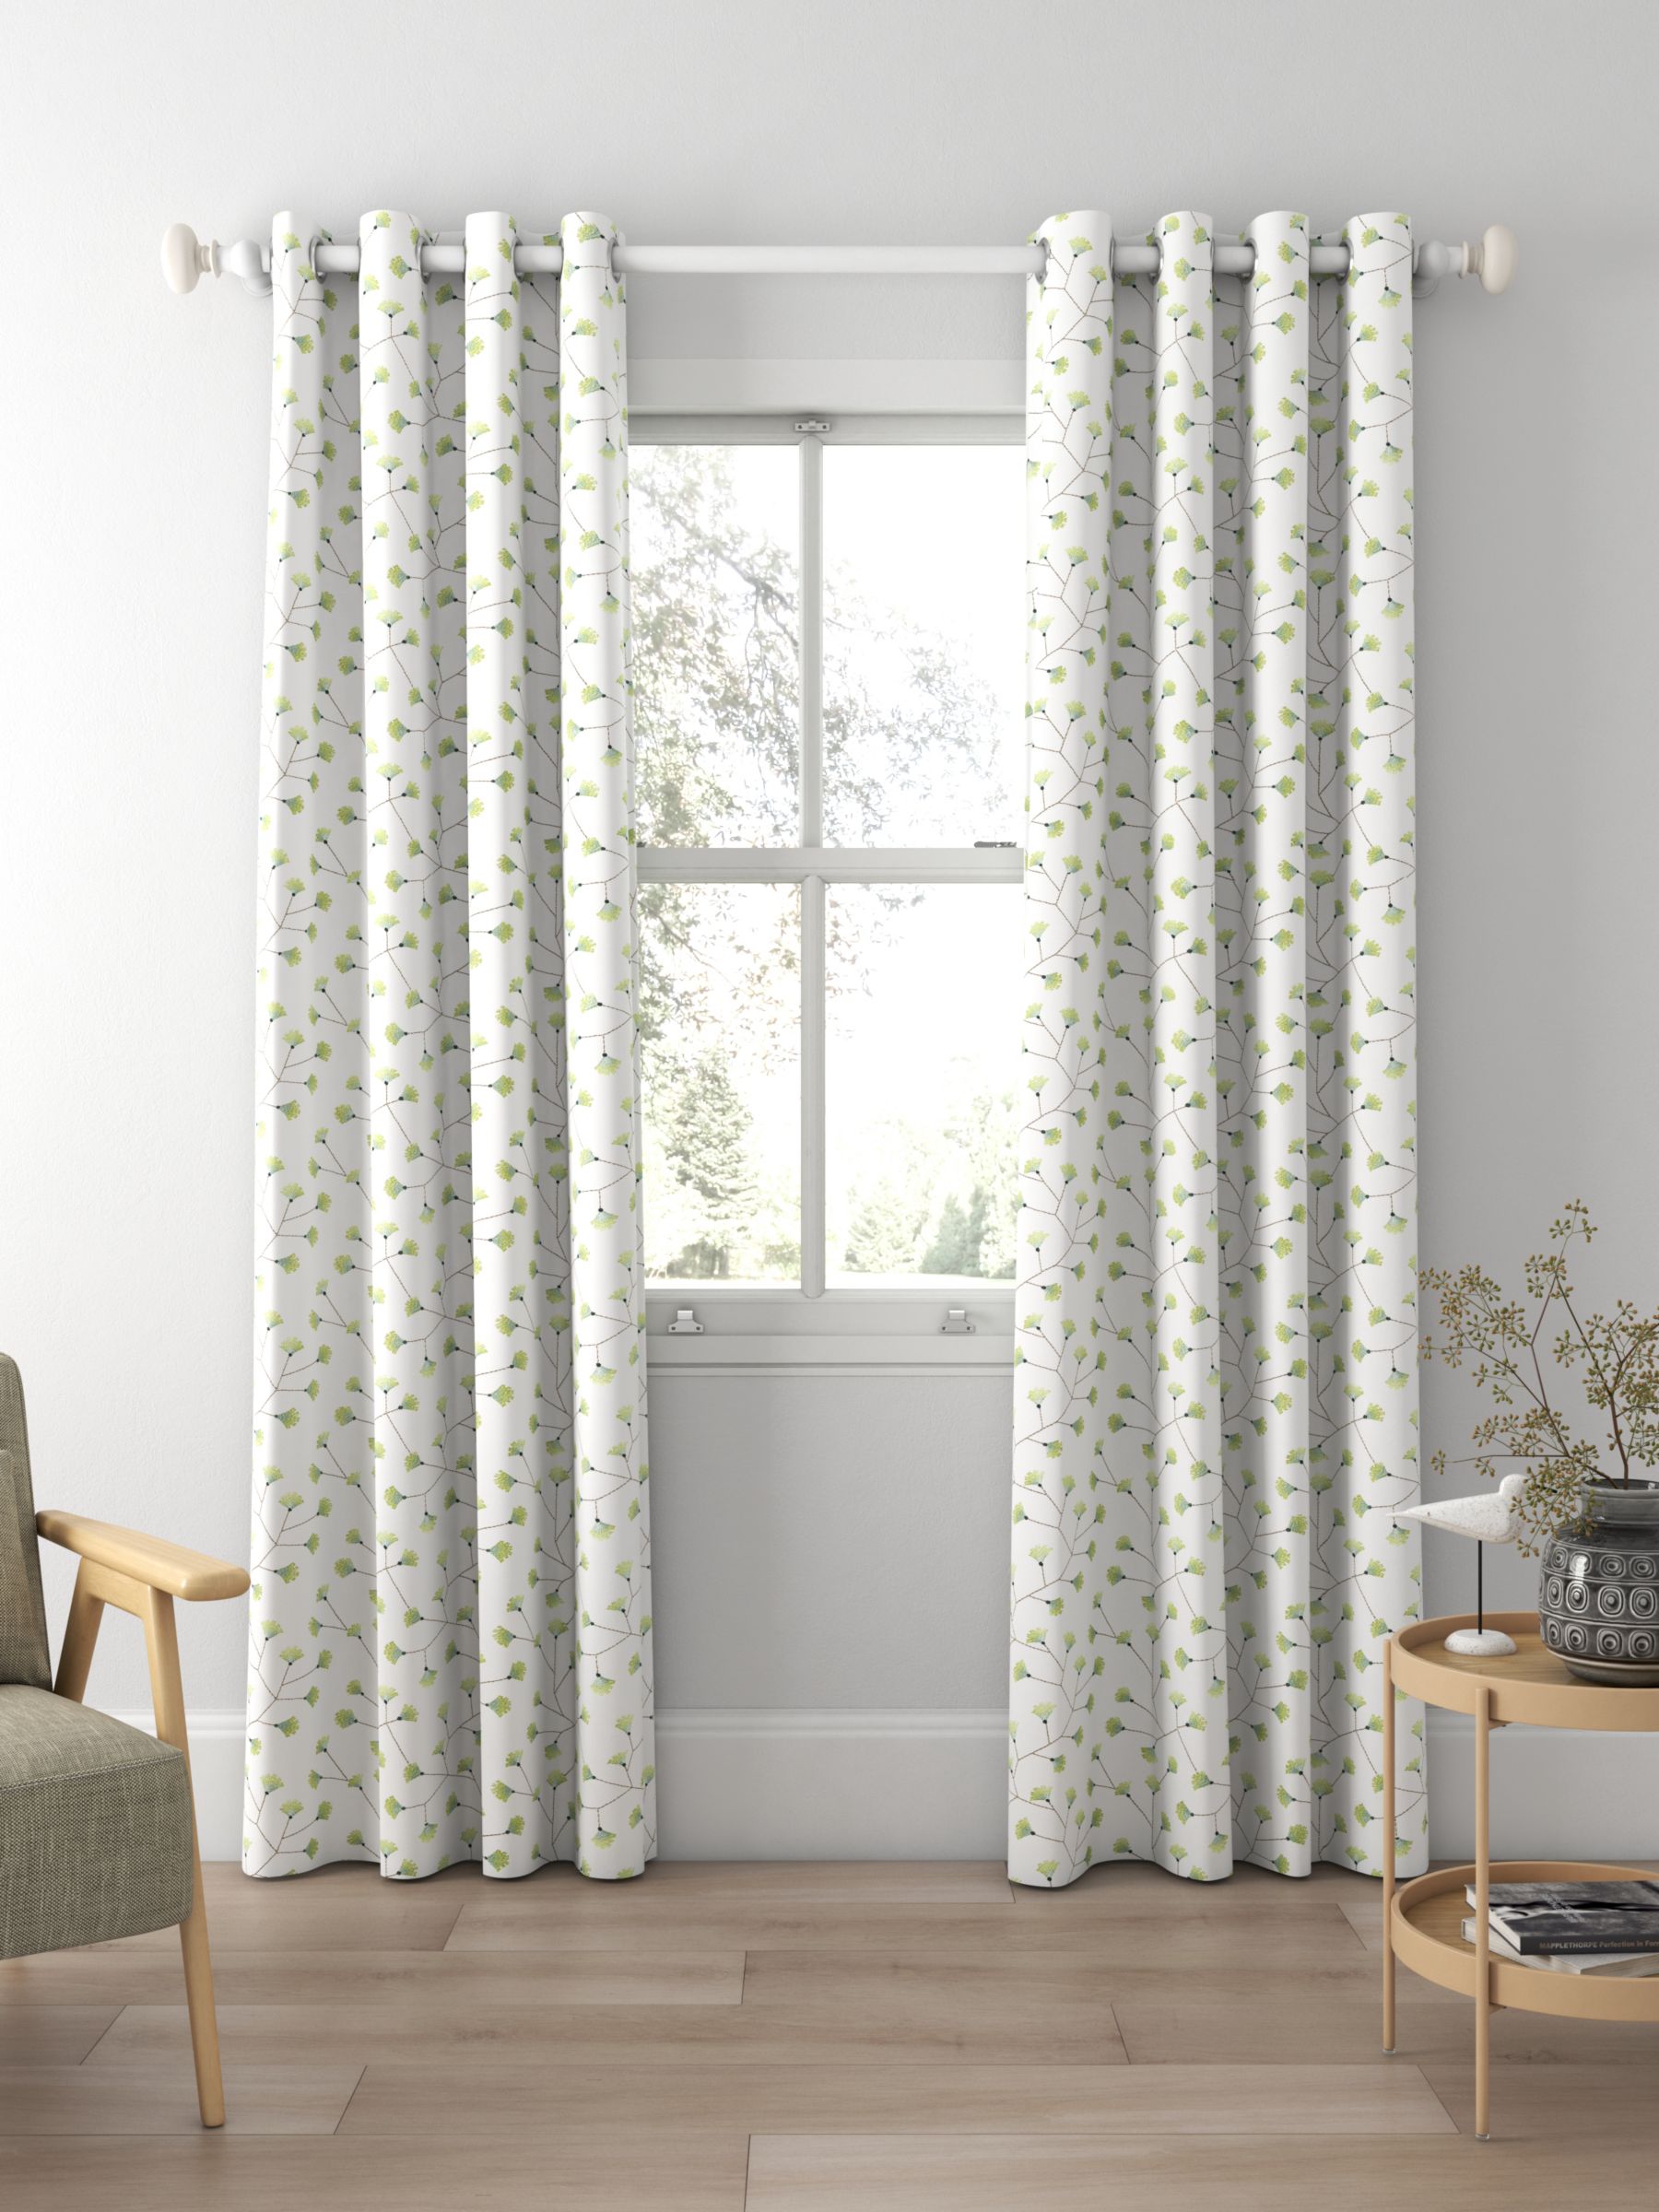 Sanderson Gingko Trail Made to Measure Curtains, Winter Rocket